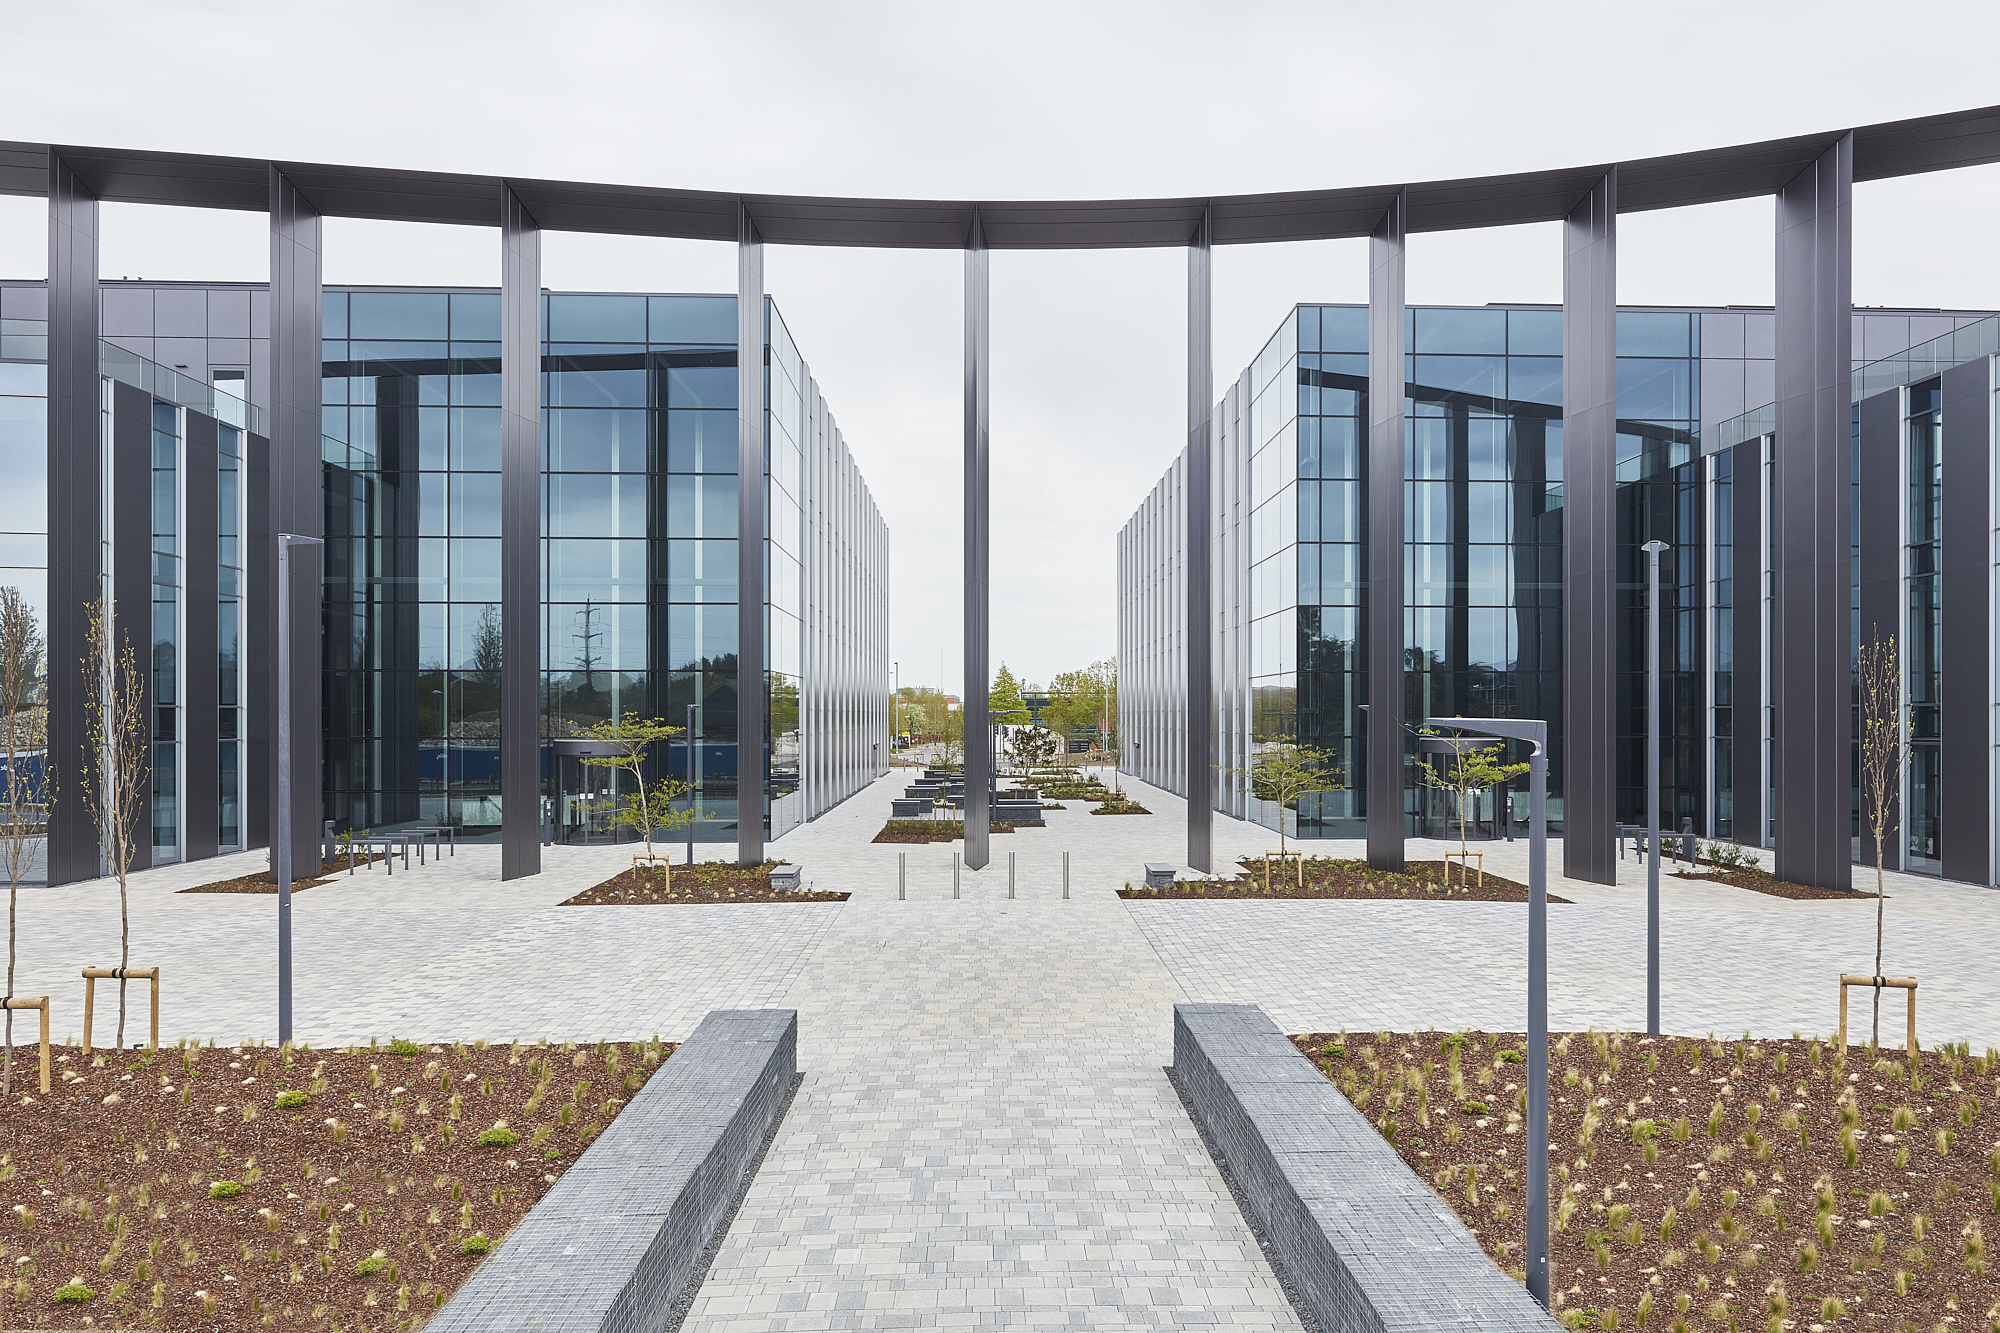 The development of two buildings to complete the regeneration of the world-renowned Cambridge Science Park